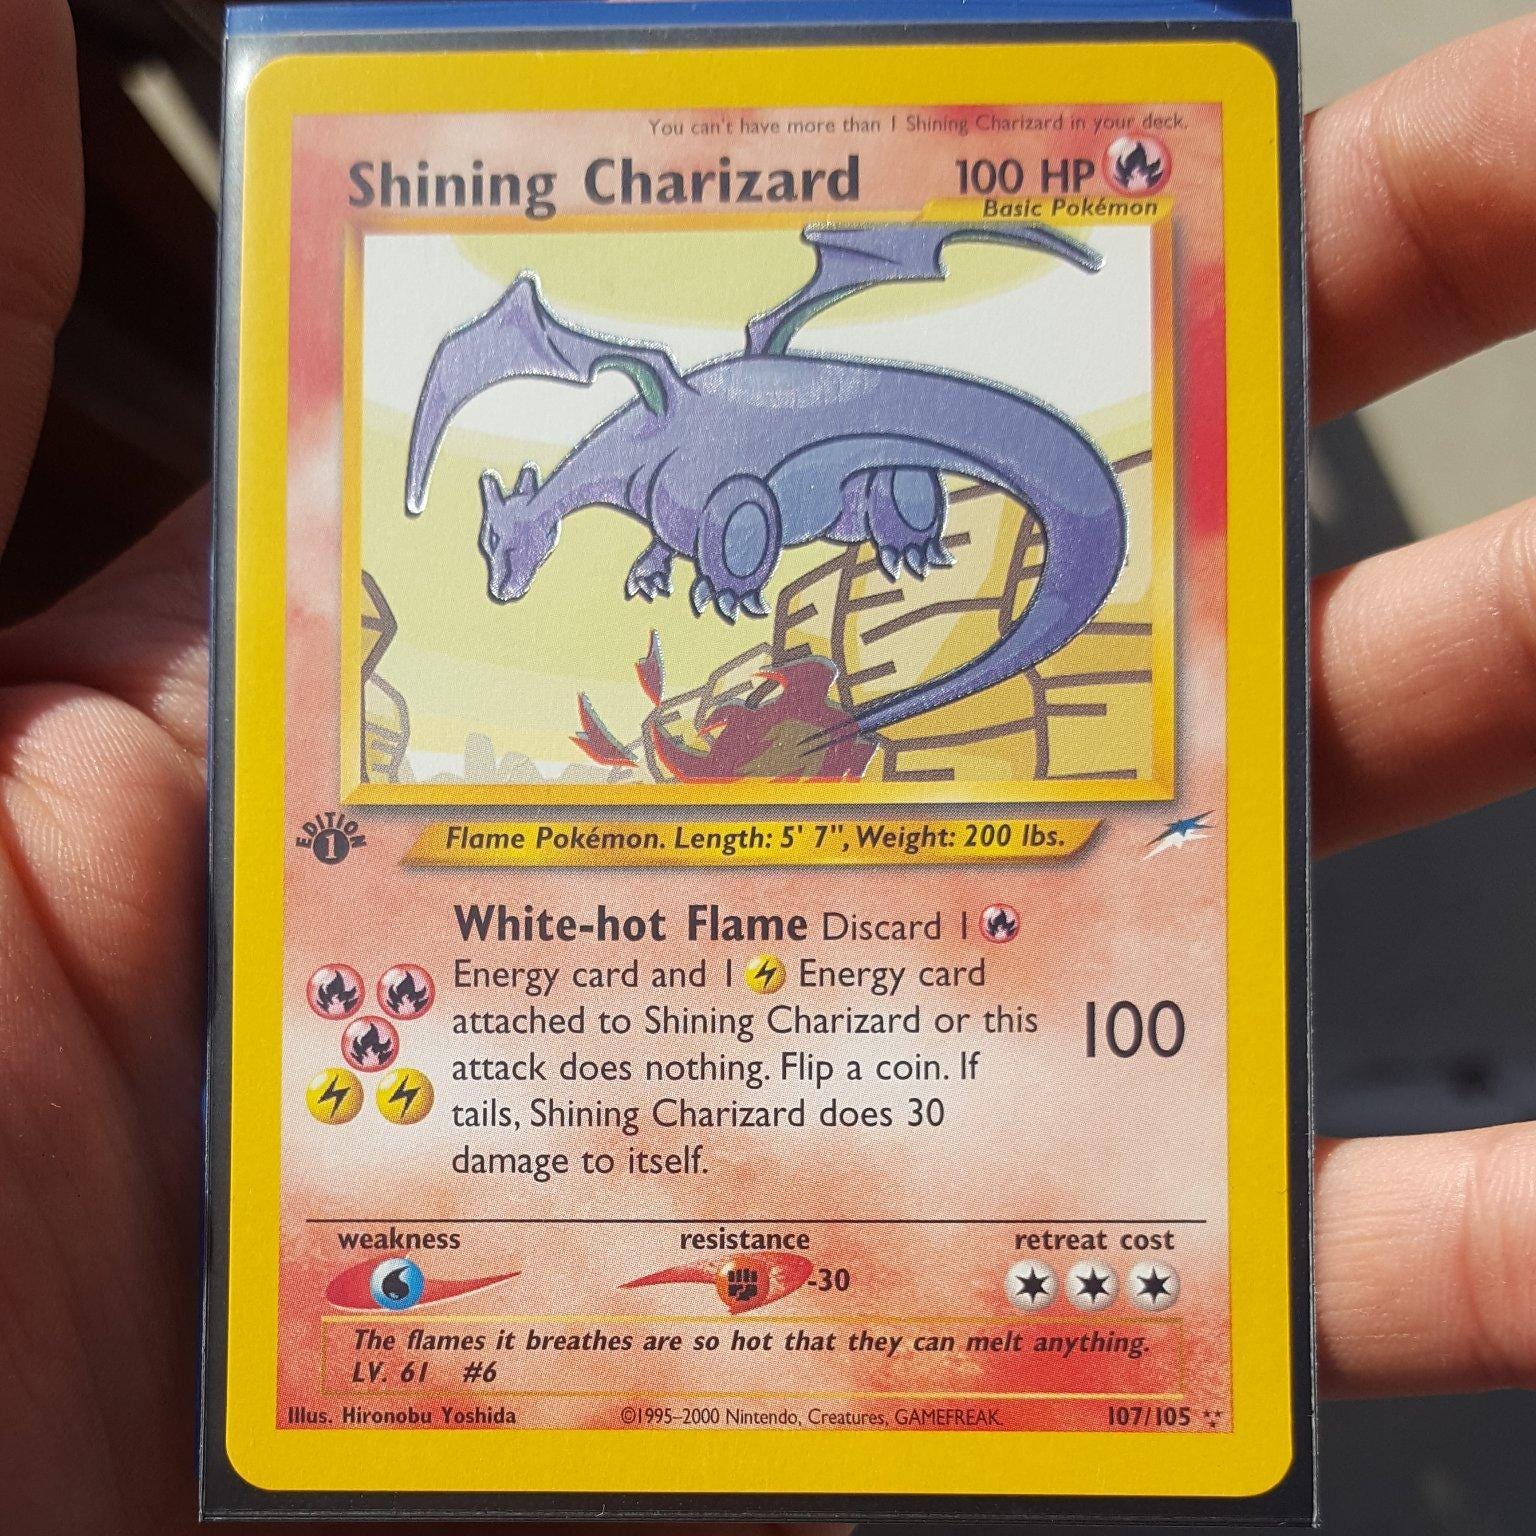 10 Rare Pokemon Cards On Snupps The Pokemon Trading Game Was First By Snupps Snupps Blog Medium